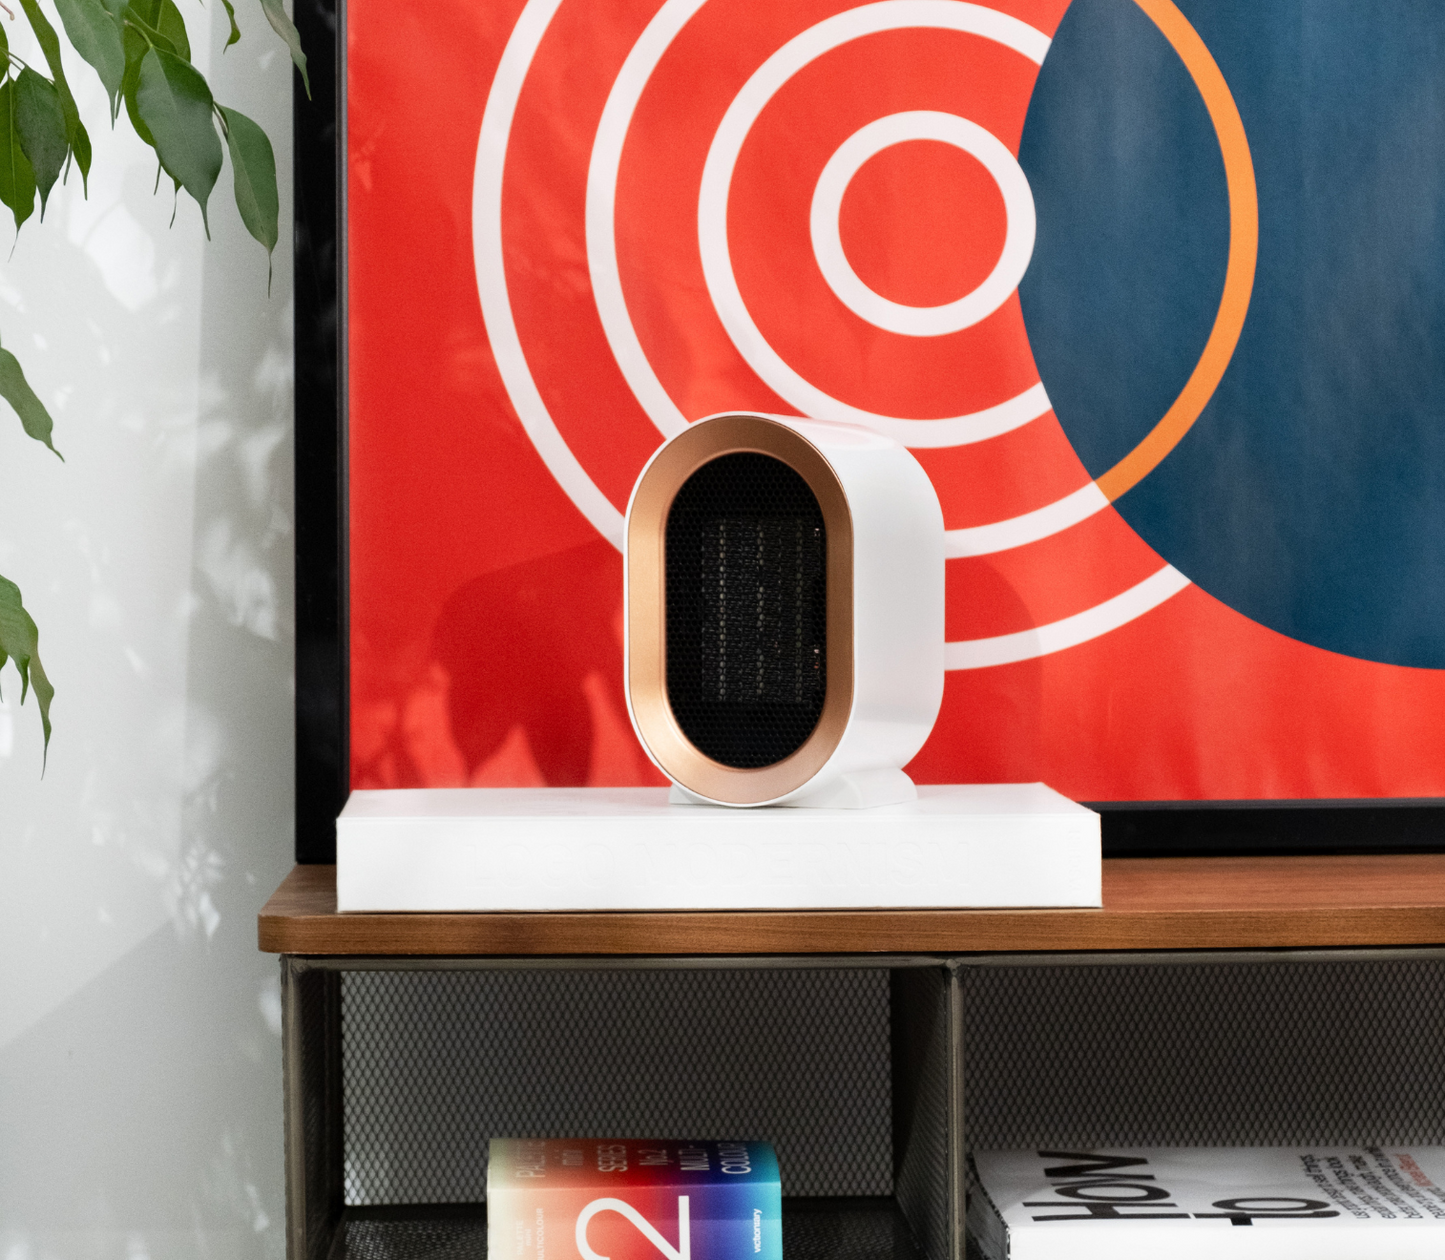 Fara by BOLDR, Compact Intelligent Energy Saving Electric Heater with an Iconic Design